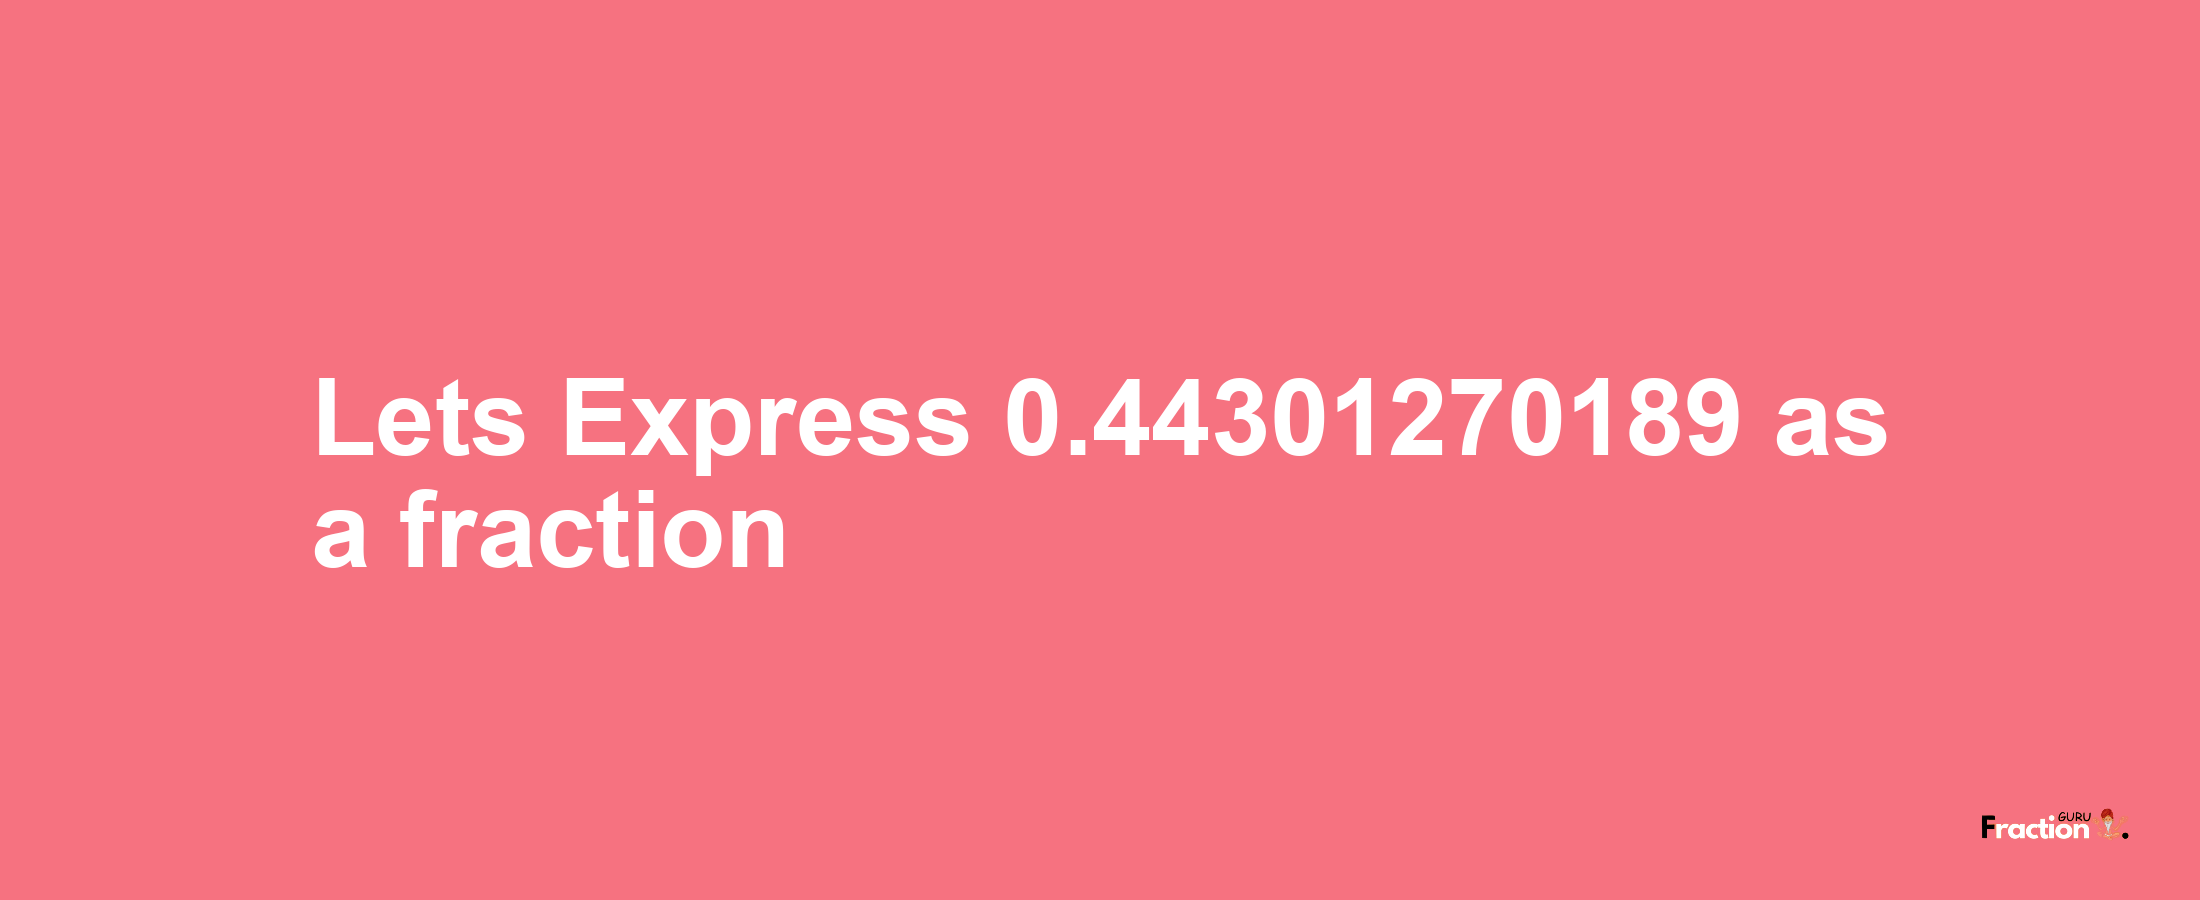 Lets Express 0.44301270189 as afraction